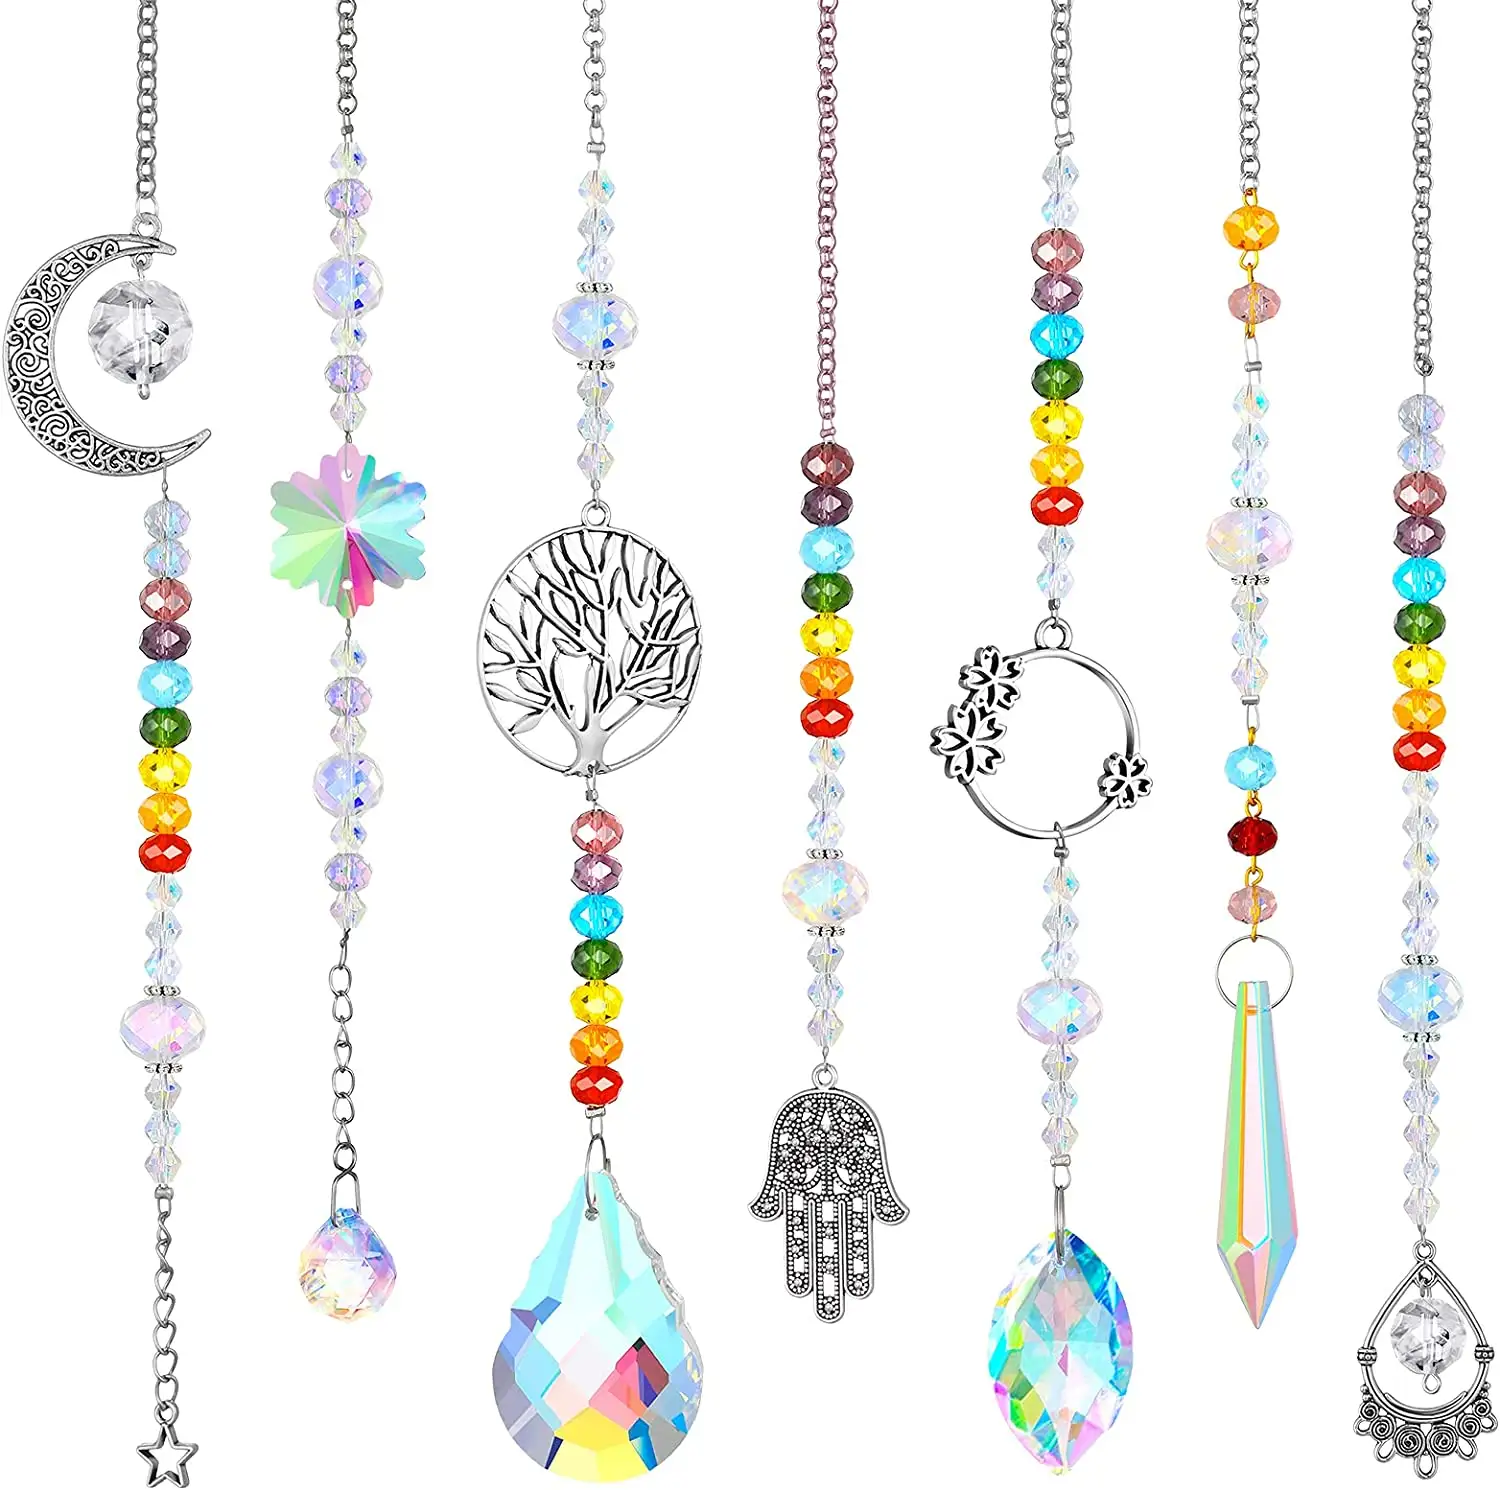 Top Quality Hanging Suncatchers Beads Moon Crystals Prisms Hanging Ornament At Very Low Price